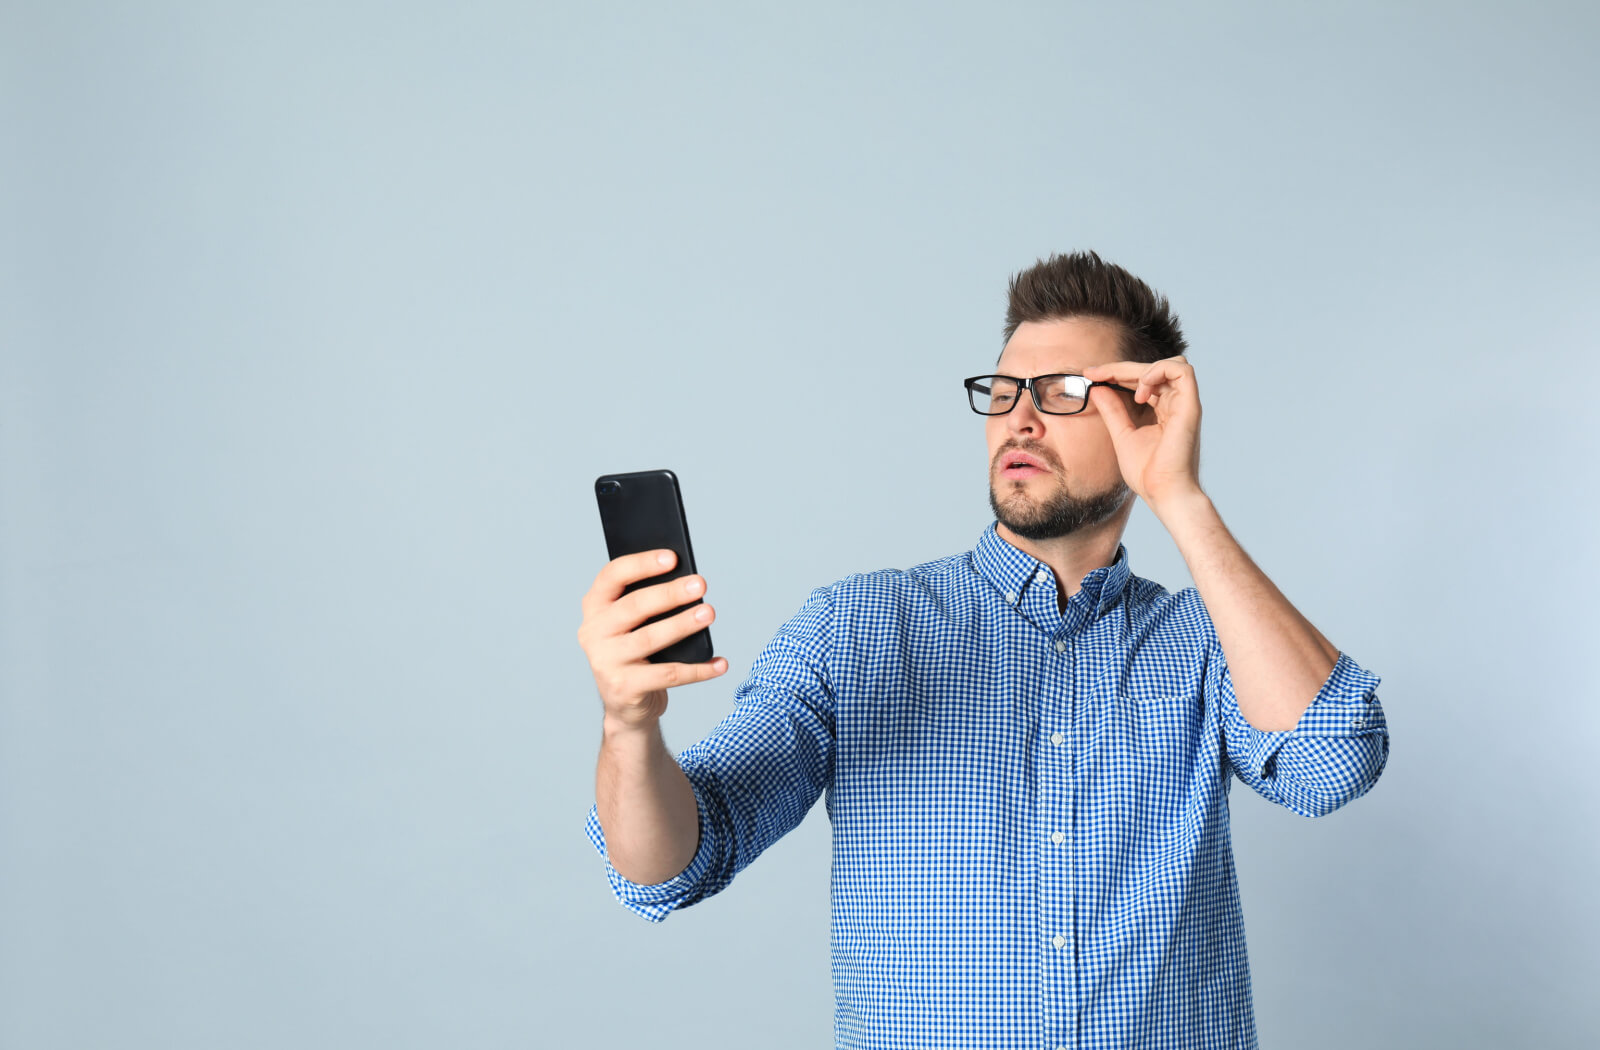 A man wearing eyeglasses is squinting while looking at his smartphone while holding it a bit far from him